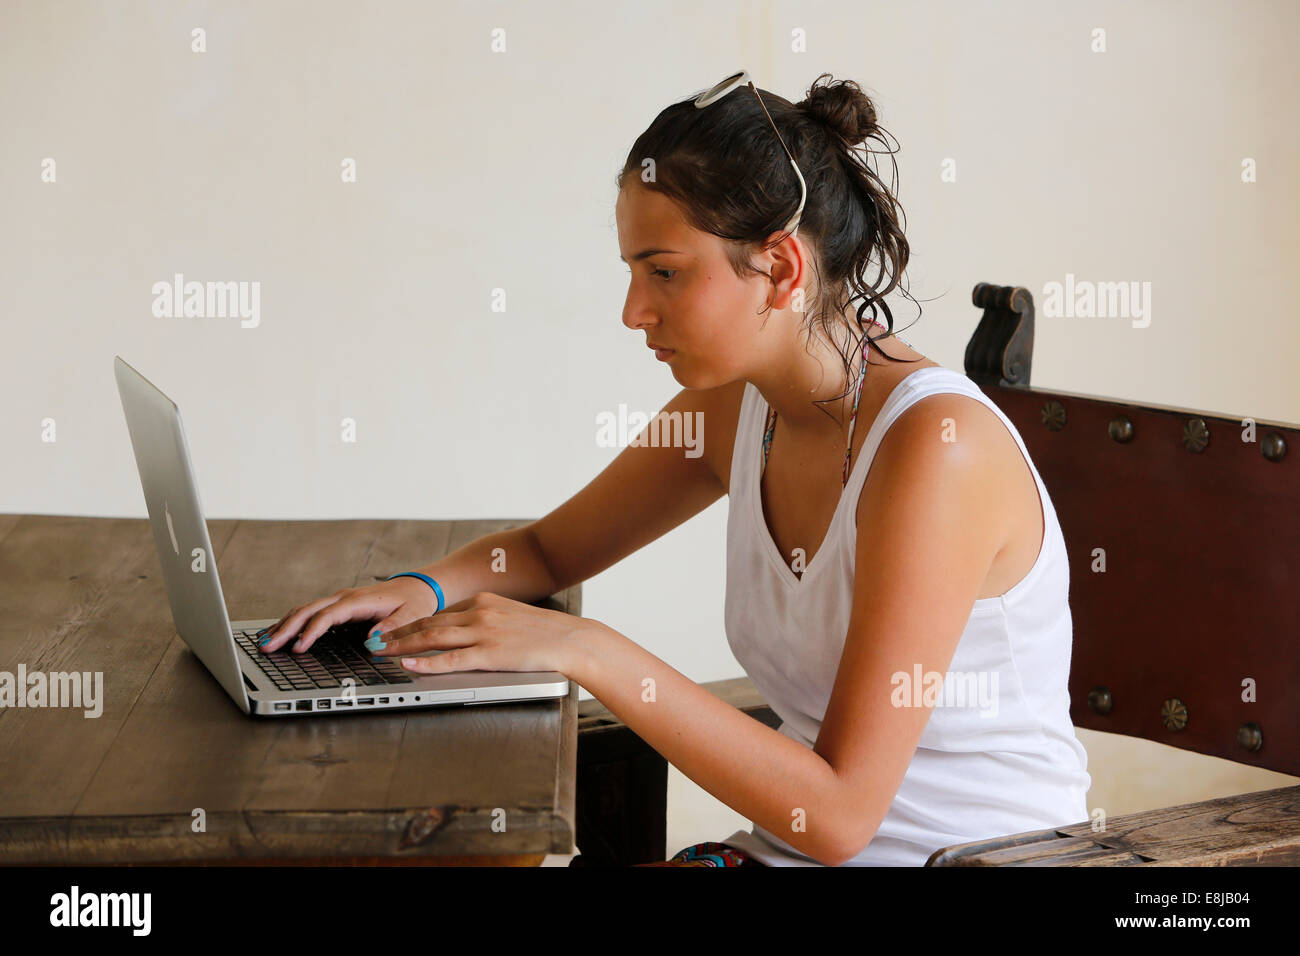 Teenager using a laptop in a Cordoba hotel Stock Photo